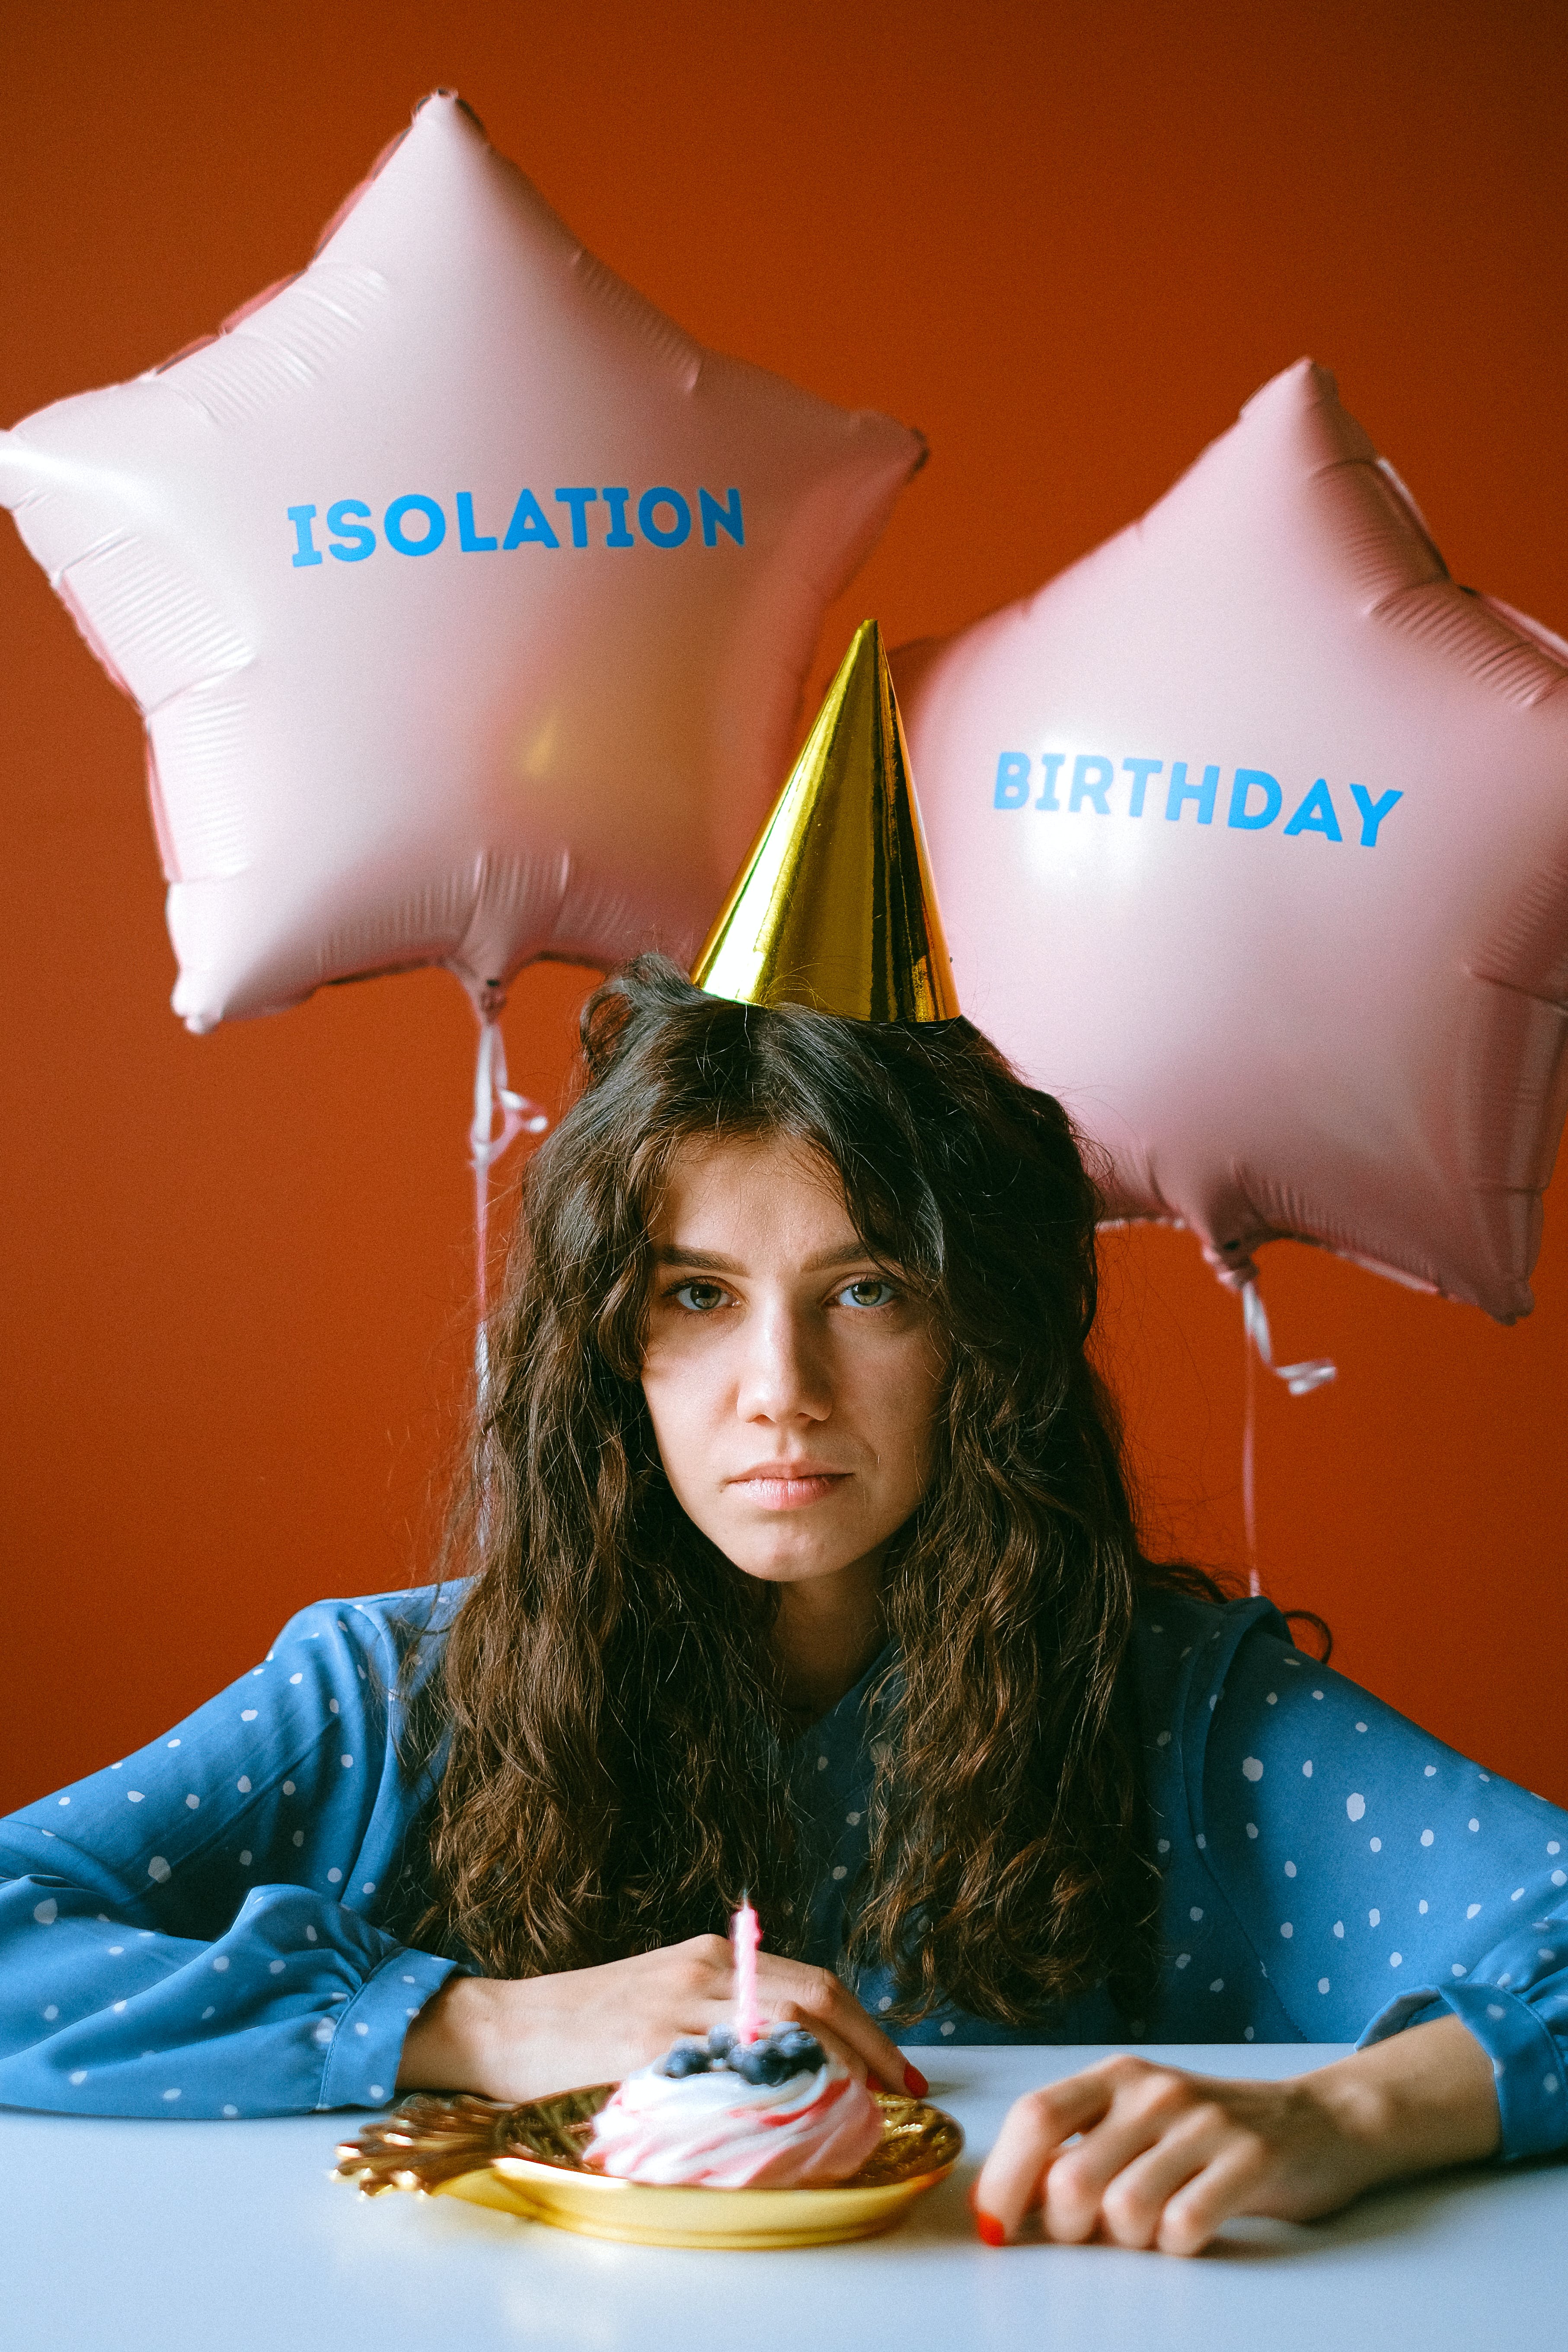 An unhappy woman celebrating her birthday. | Source: Pexels